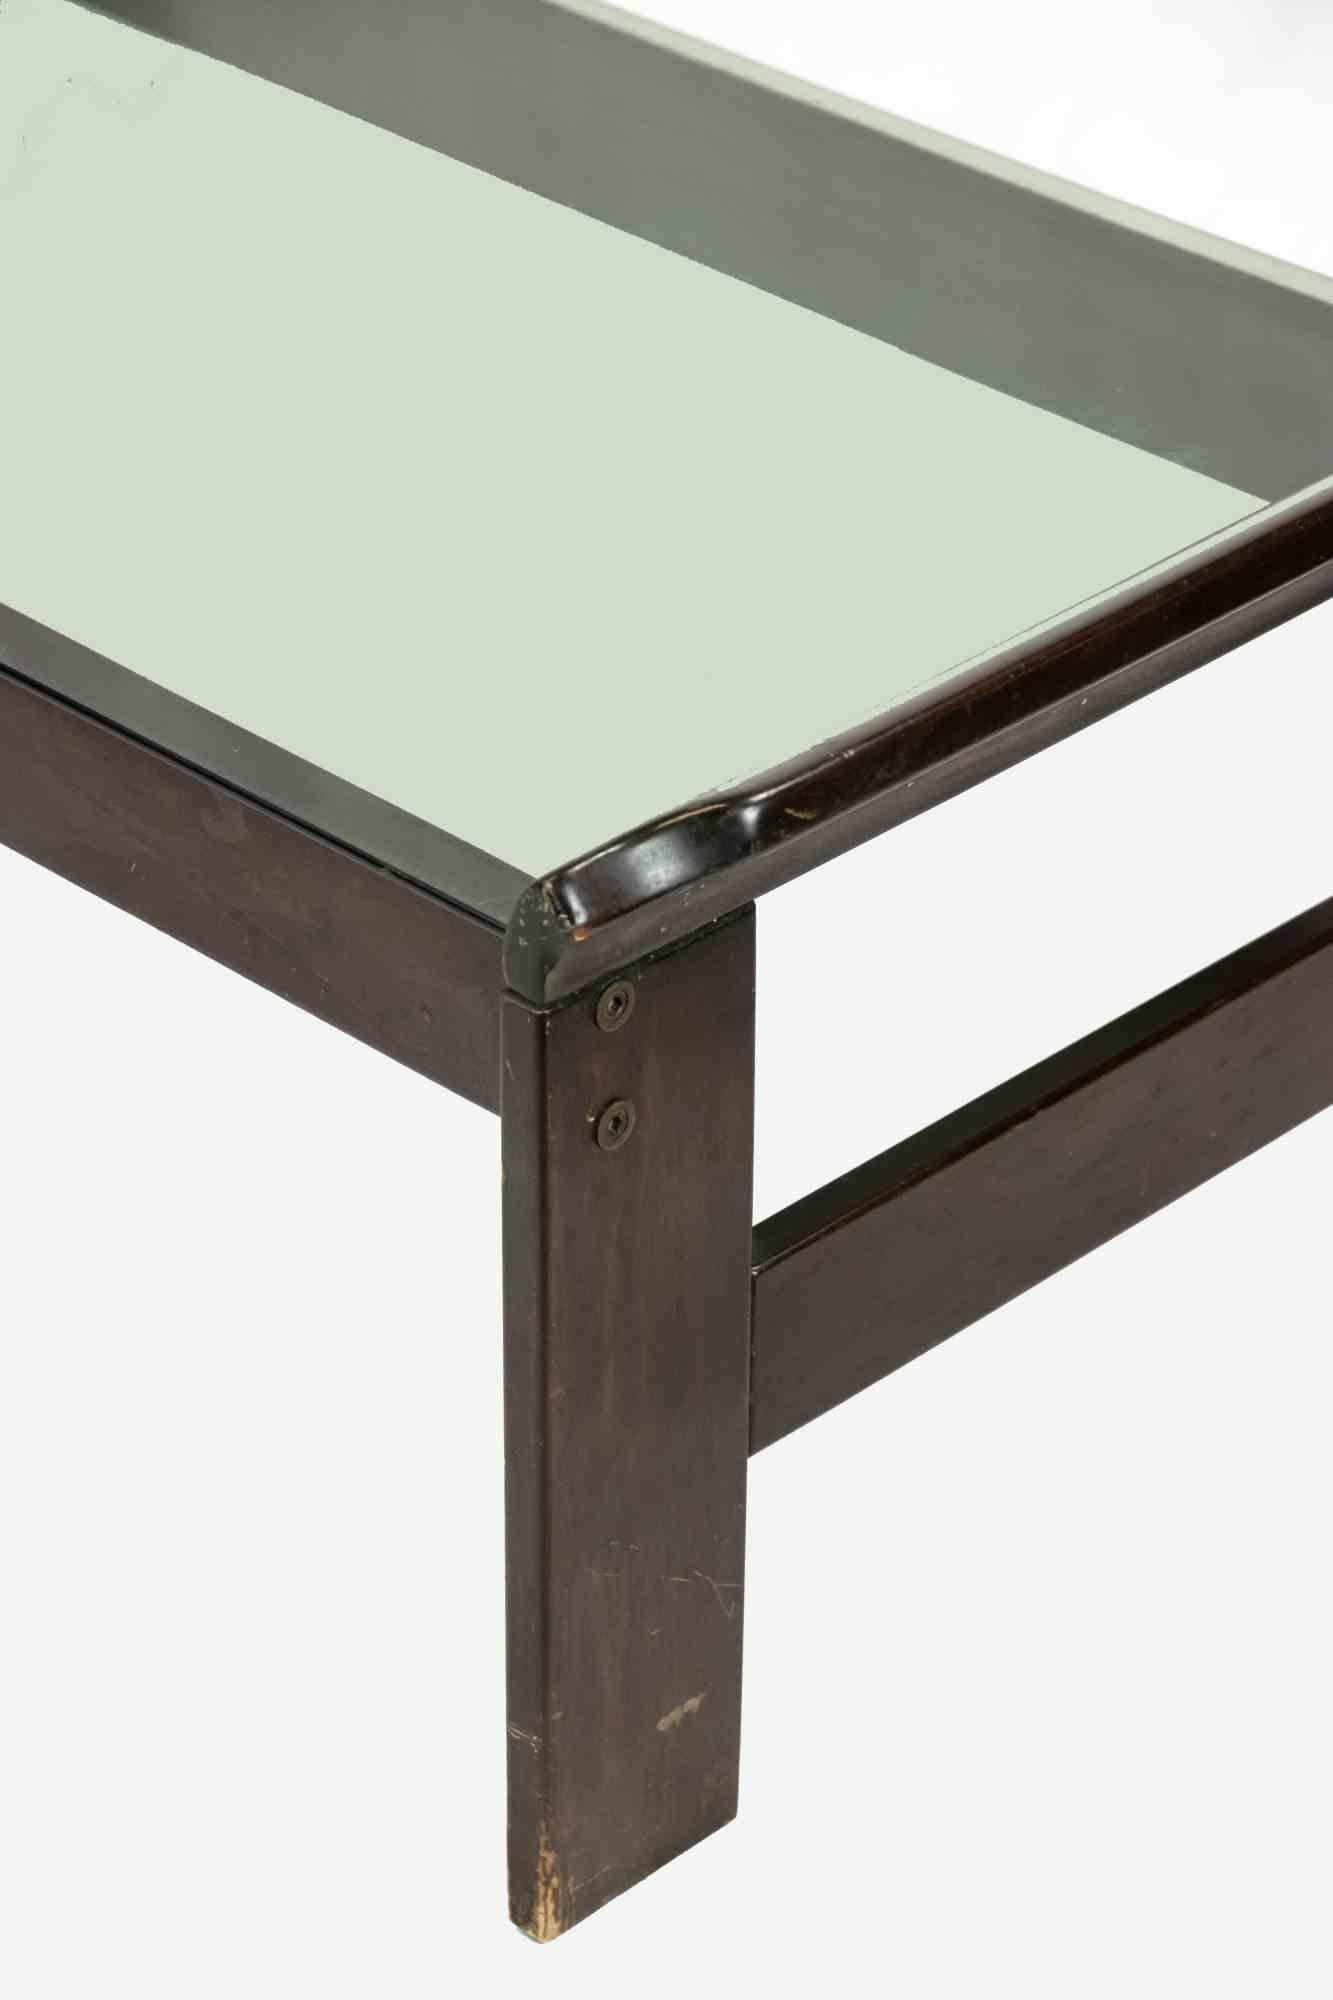 Coffe table is an original design furniture item realized by Afra and Tobia Scarpa in the 1970s

A vintage coffee table realized in mahogany wood ant glass top.

Mint conditions except for some scratches and dents on the wood.